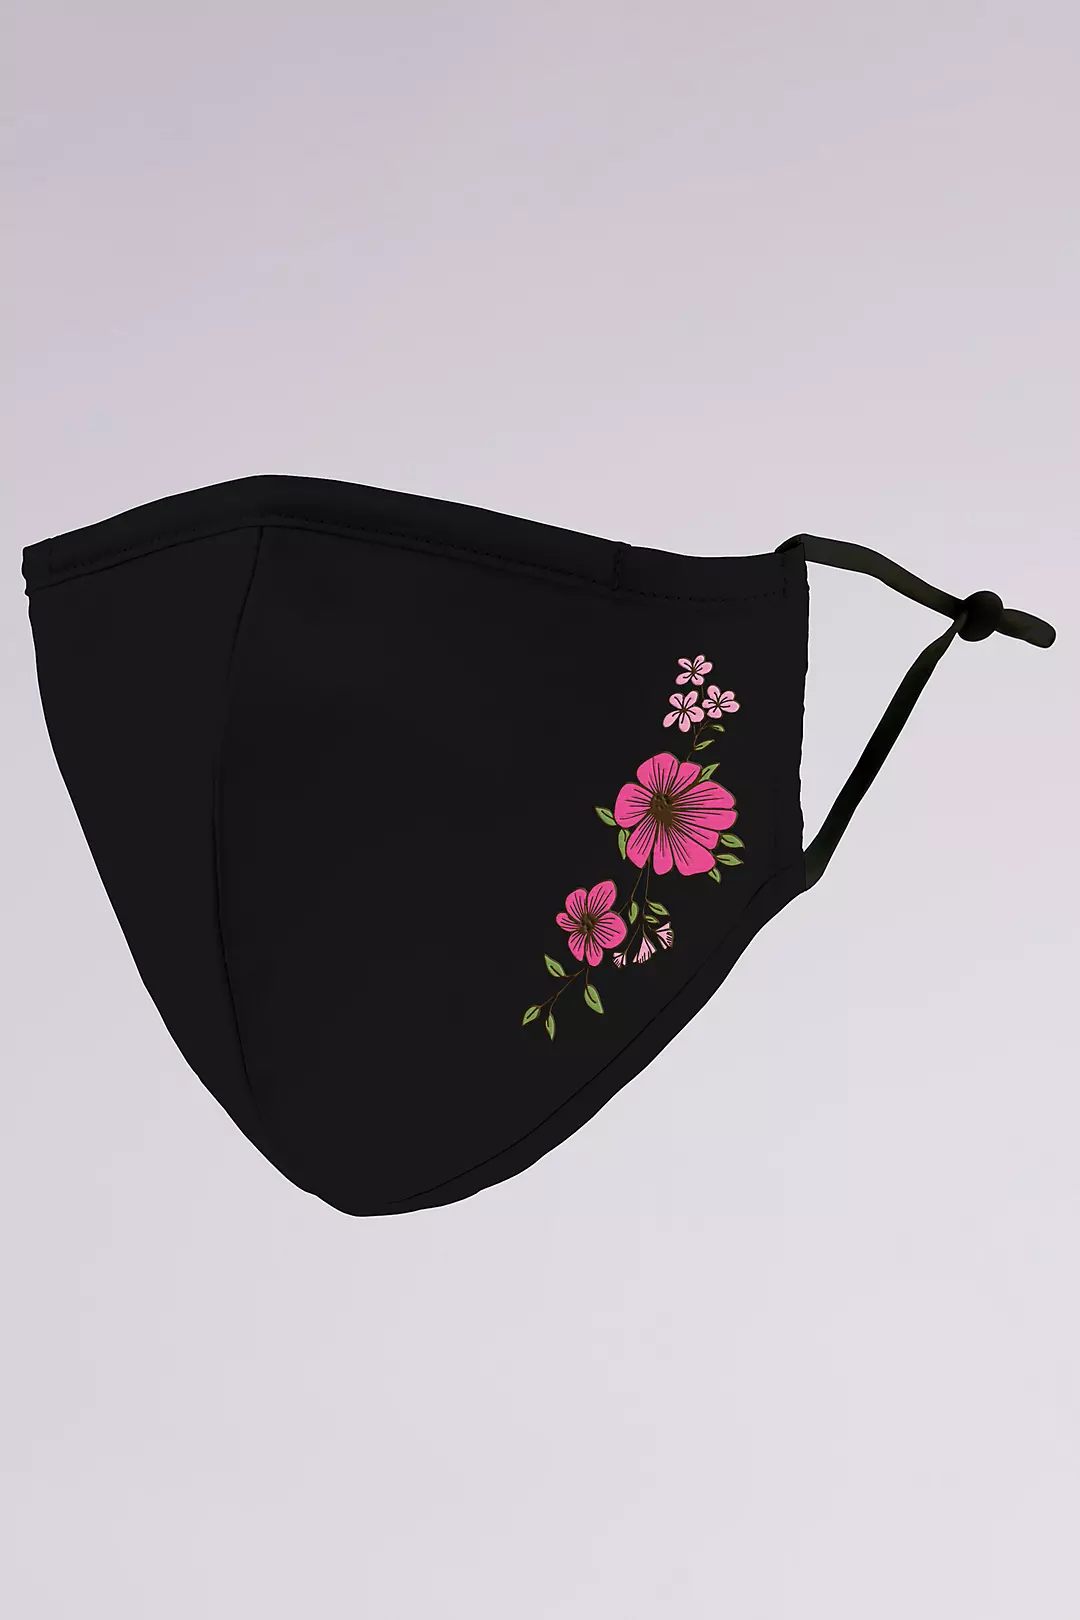 Simple Floral Mask with Adjustable Ear Loops Image